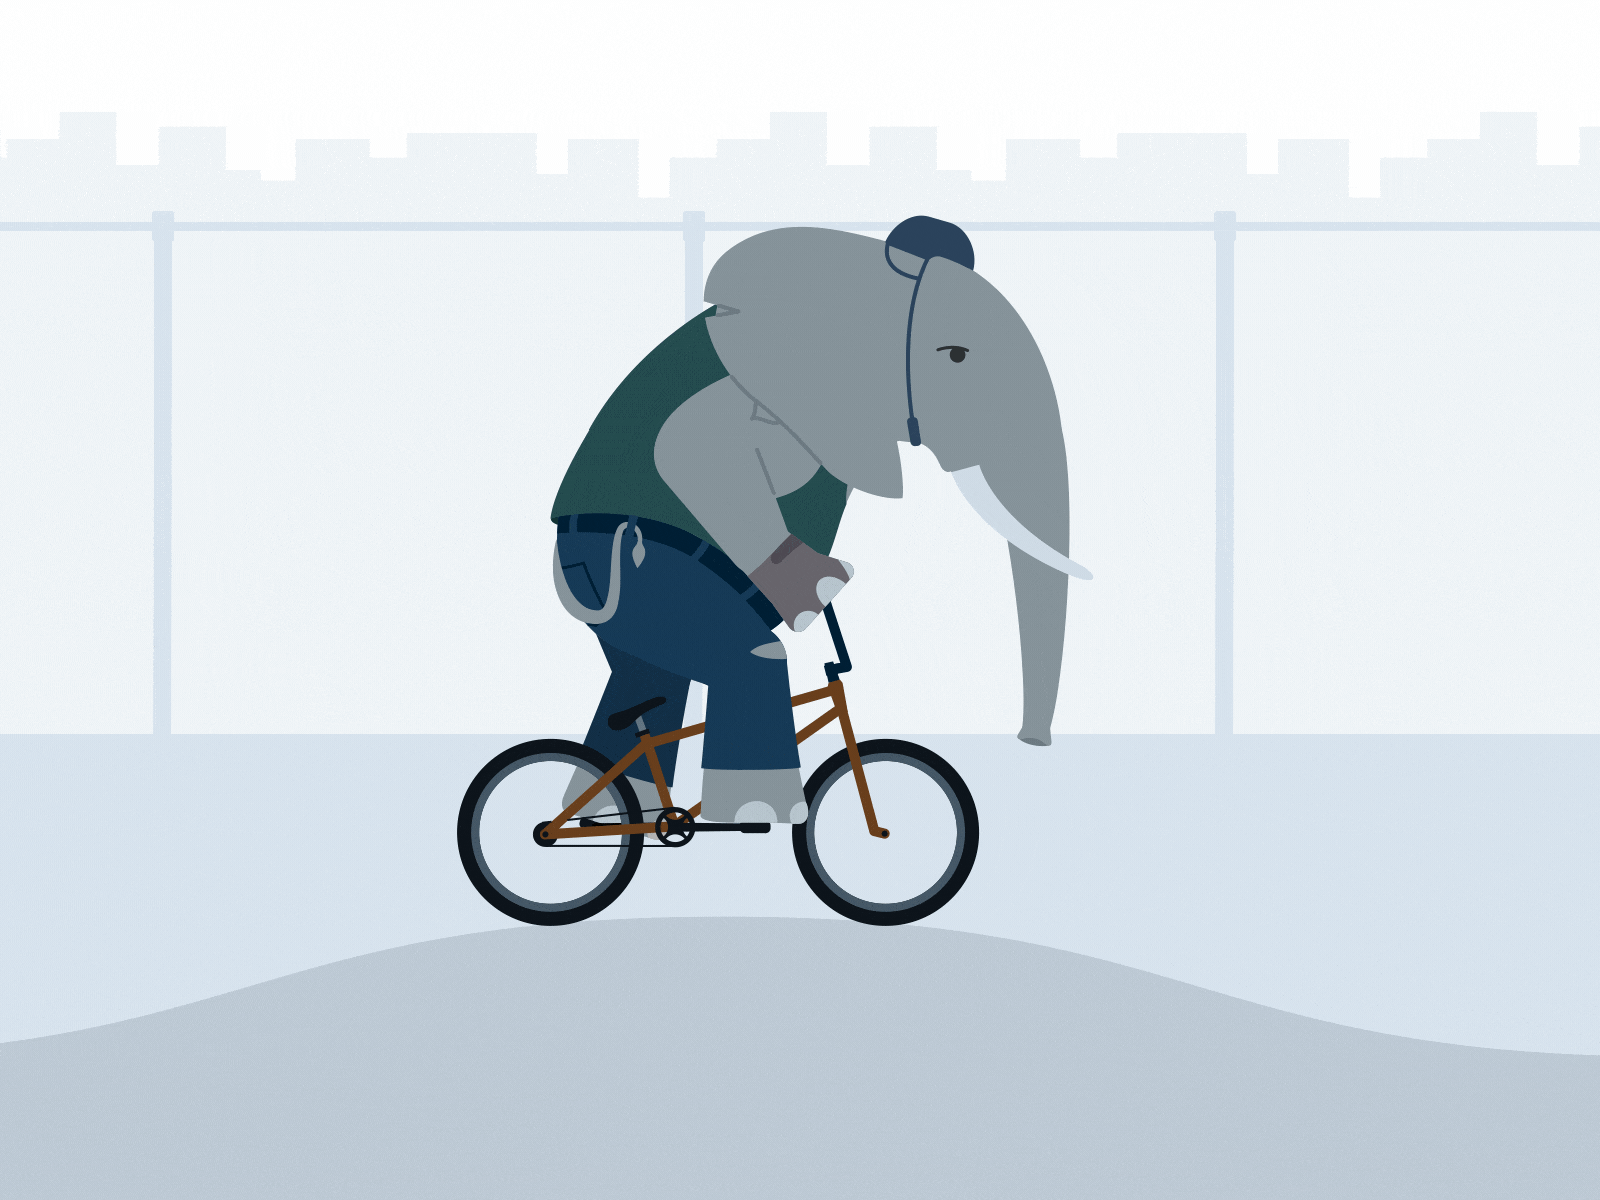 The Trackfinder after effects animation bike city elephant loop new york pumptrack